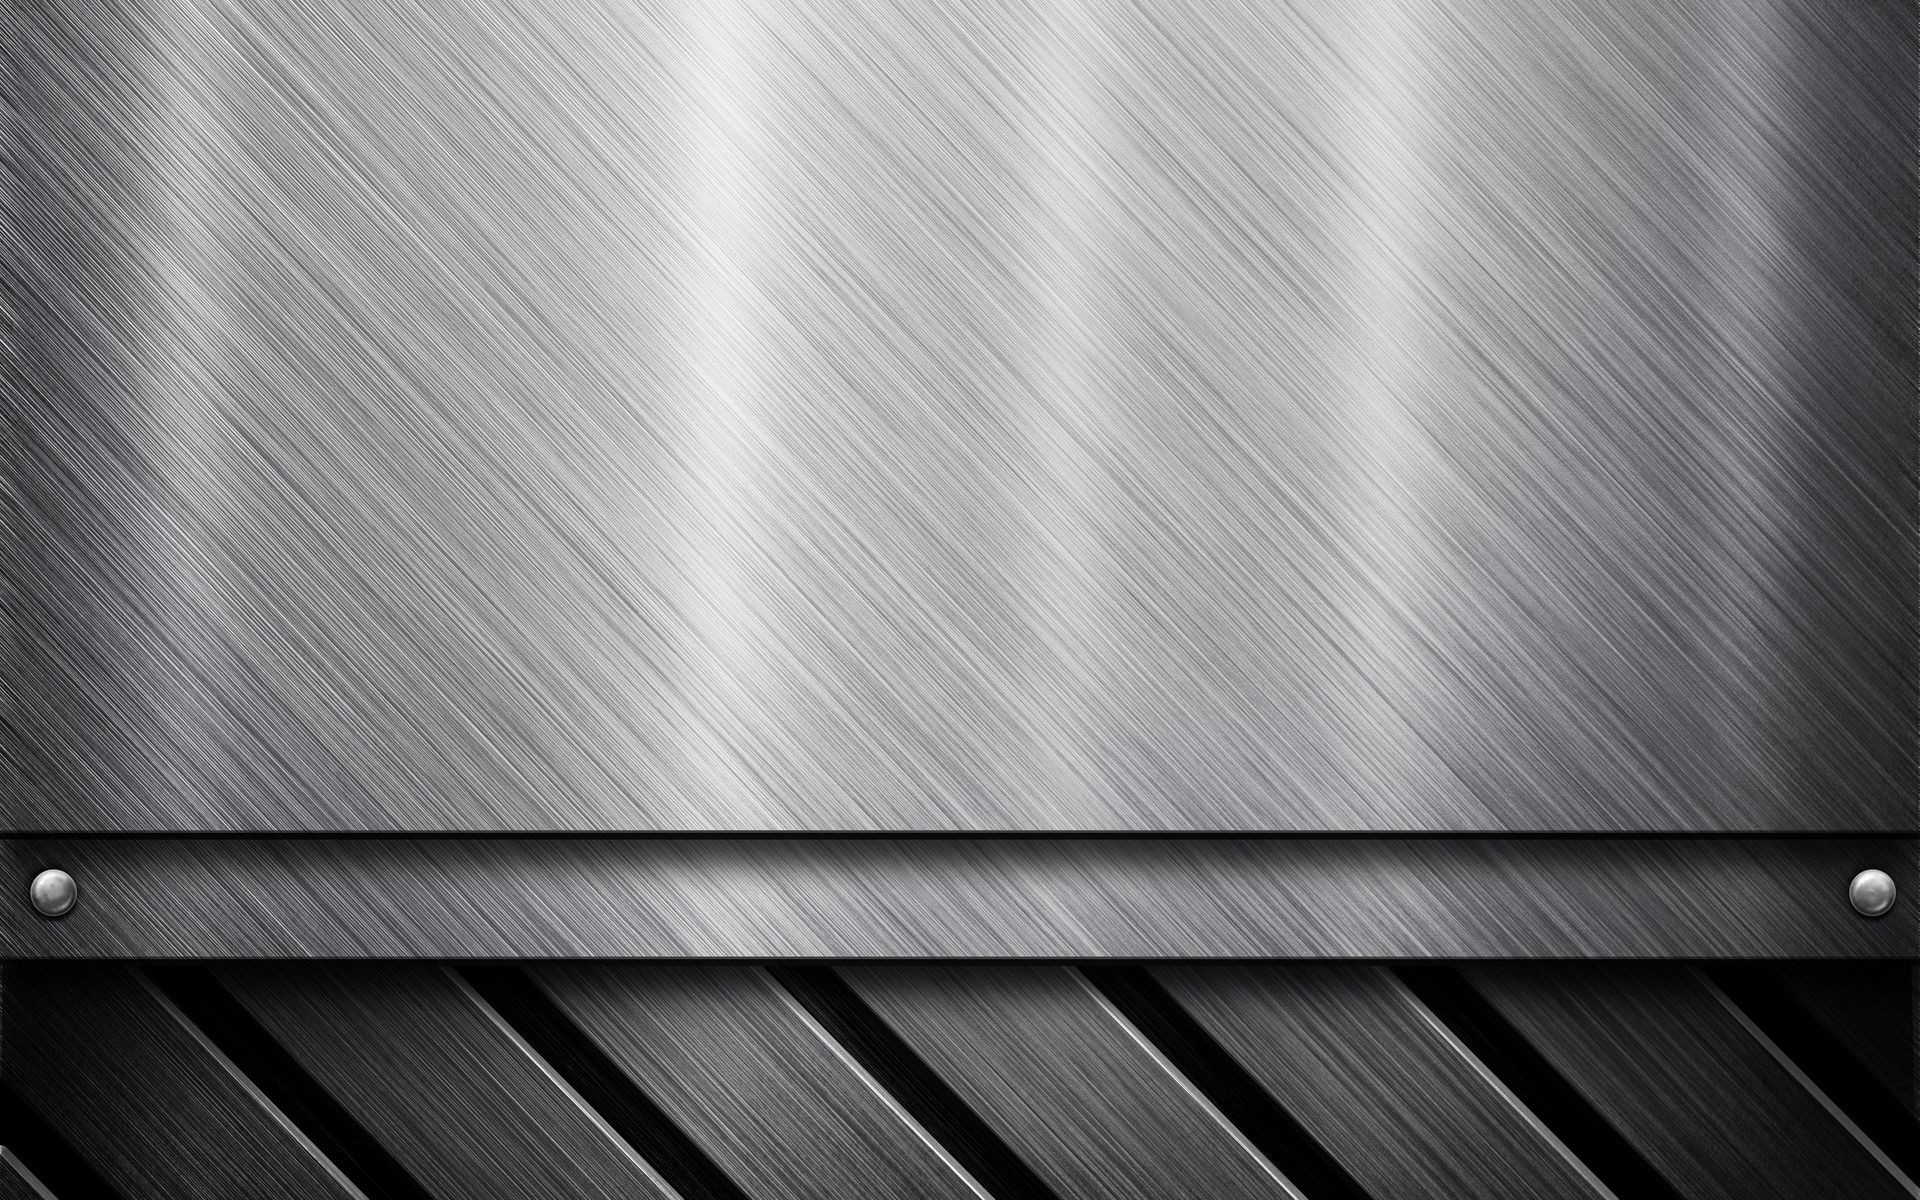 Stainless Steel Looking Wallpaper 38 Images HD Wallpapers Download Free Images Wallpaper [wallpaper981.blogspot.com]